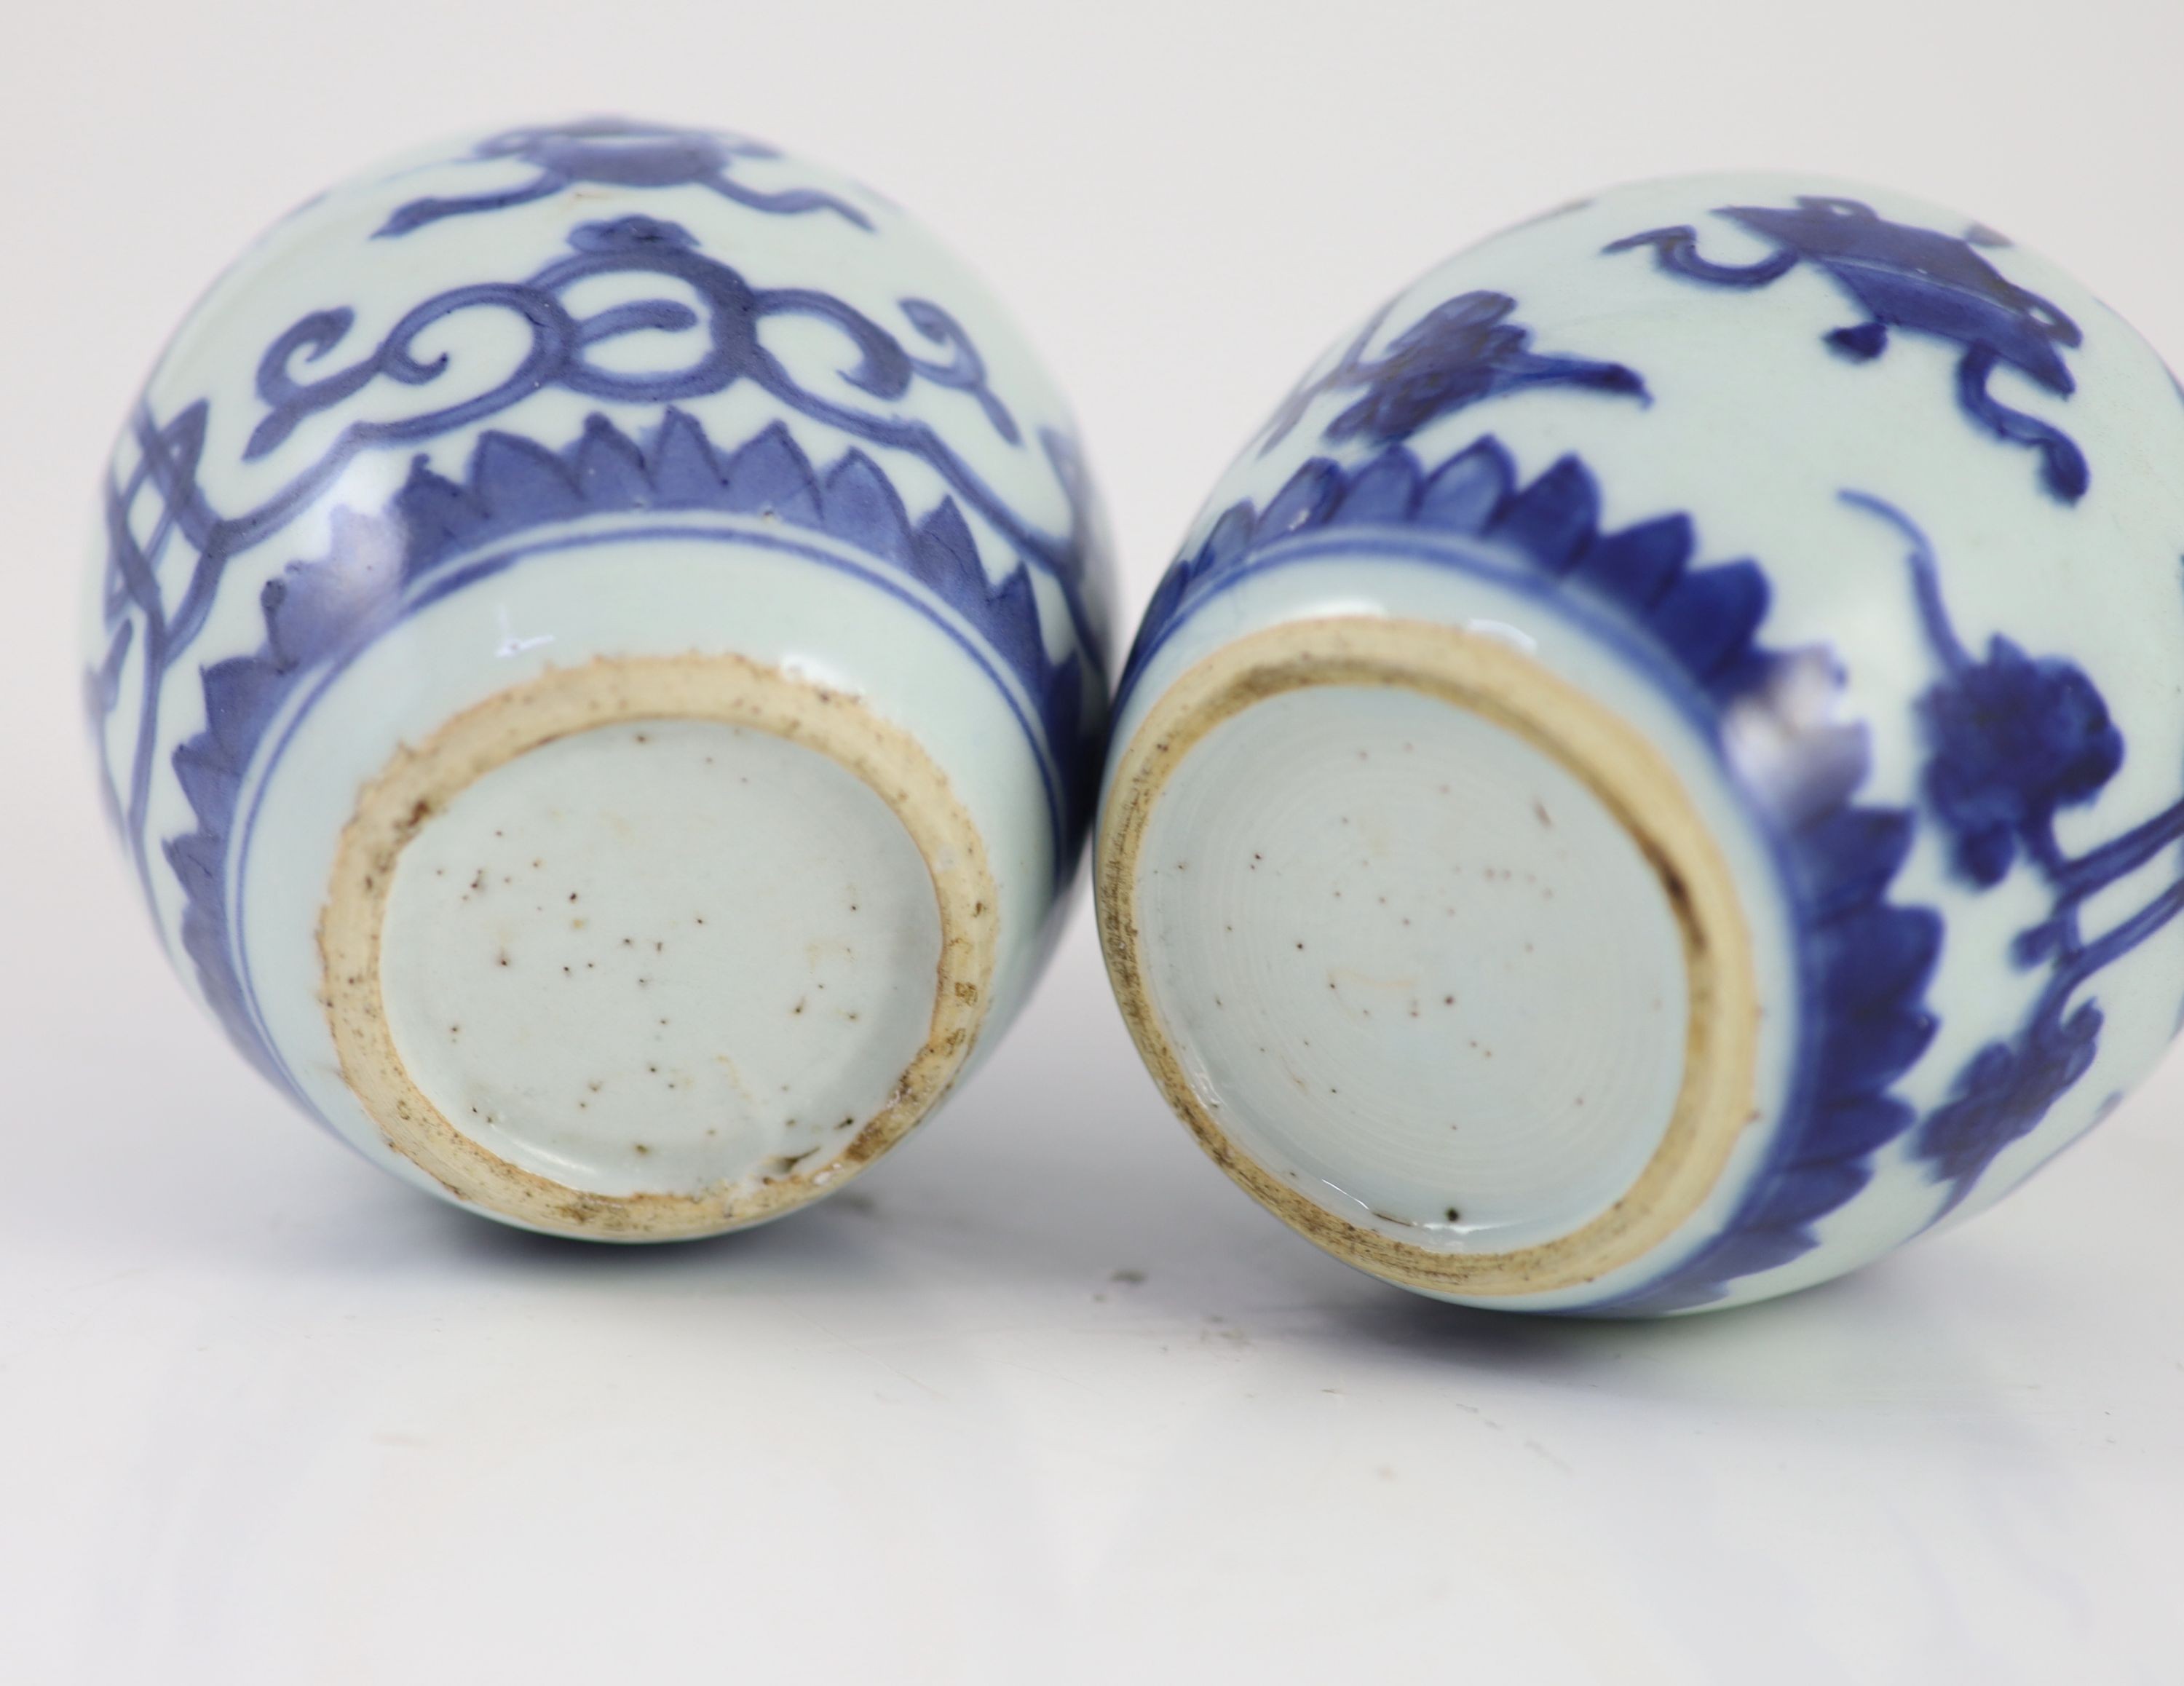 A near pair of Chinese blue and white ovoid jars, Kangxi period, 10 cm high, wood covers